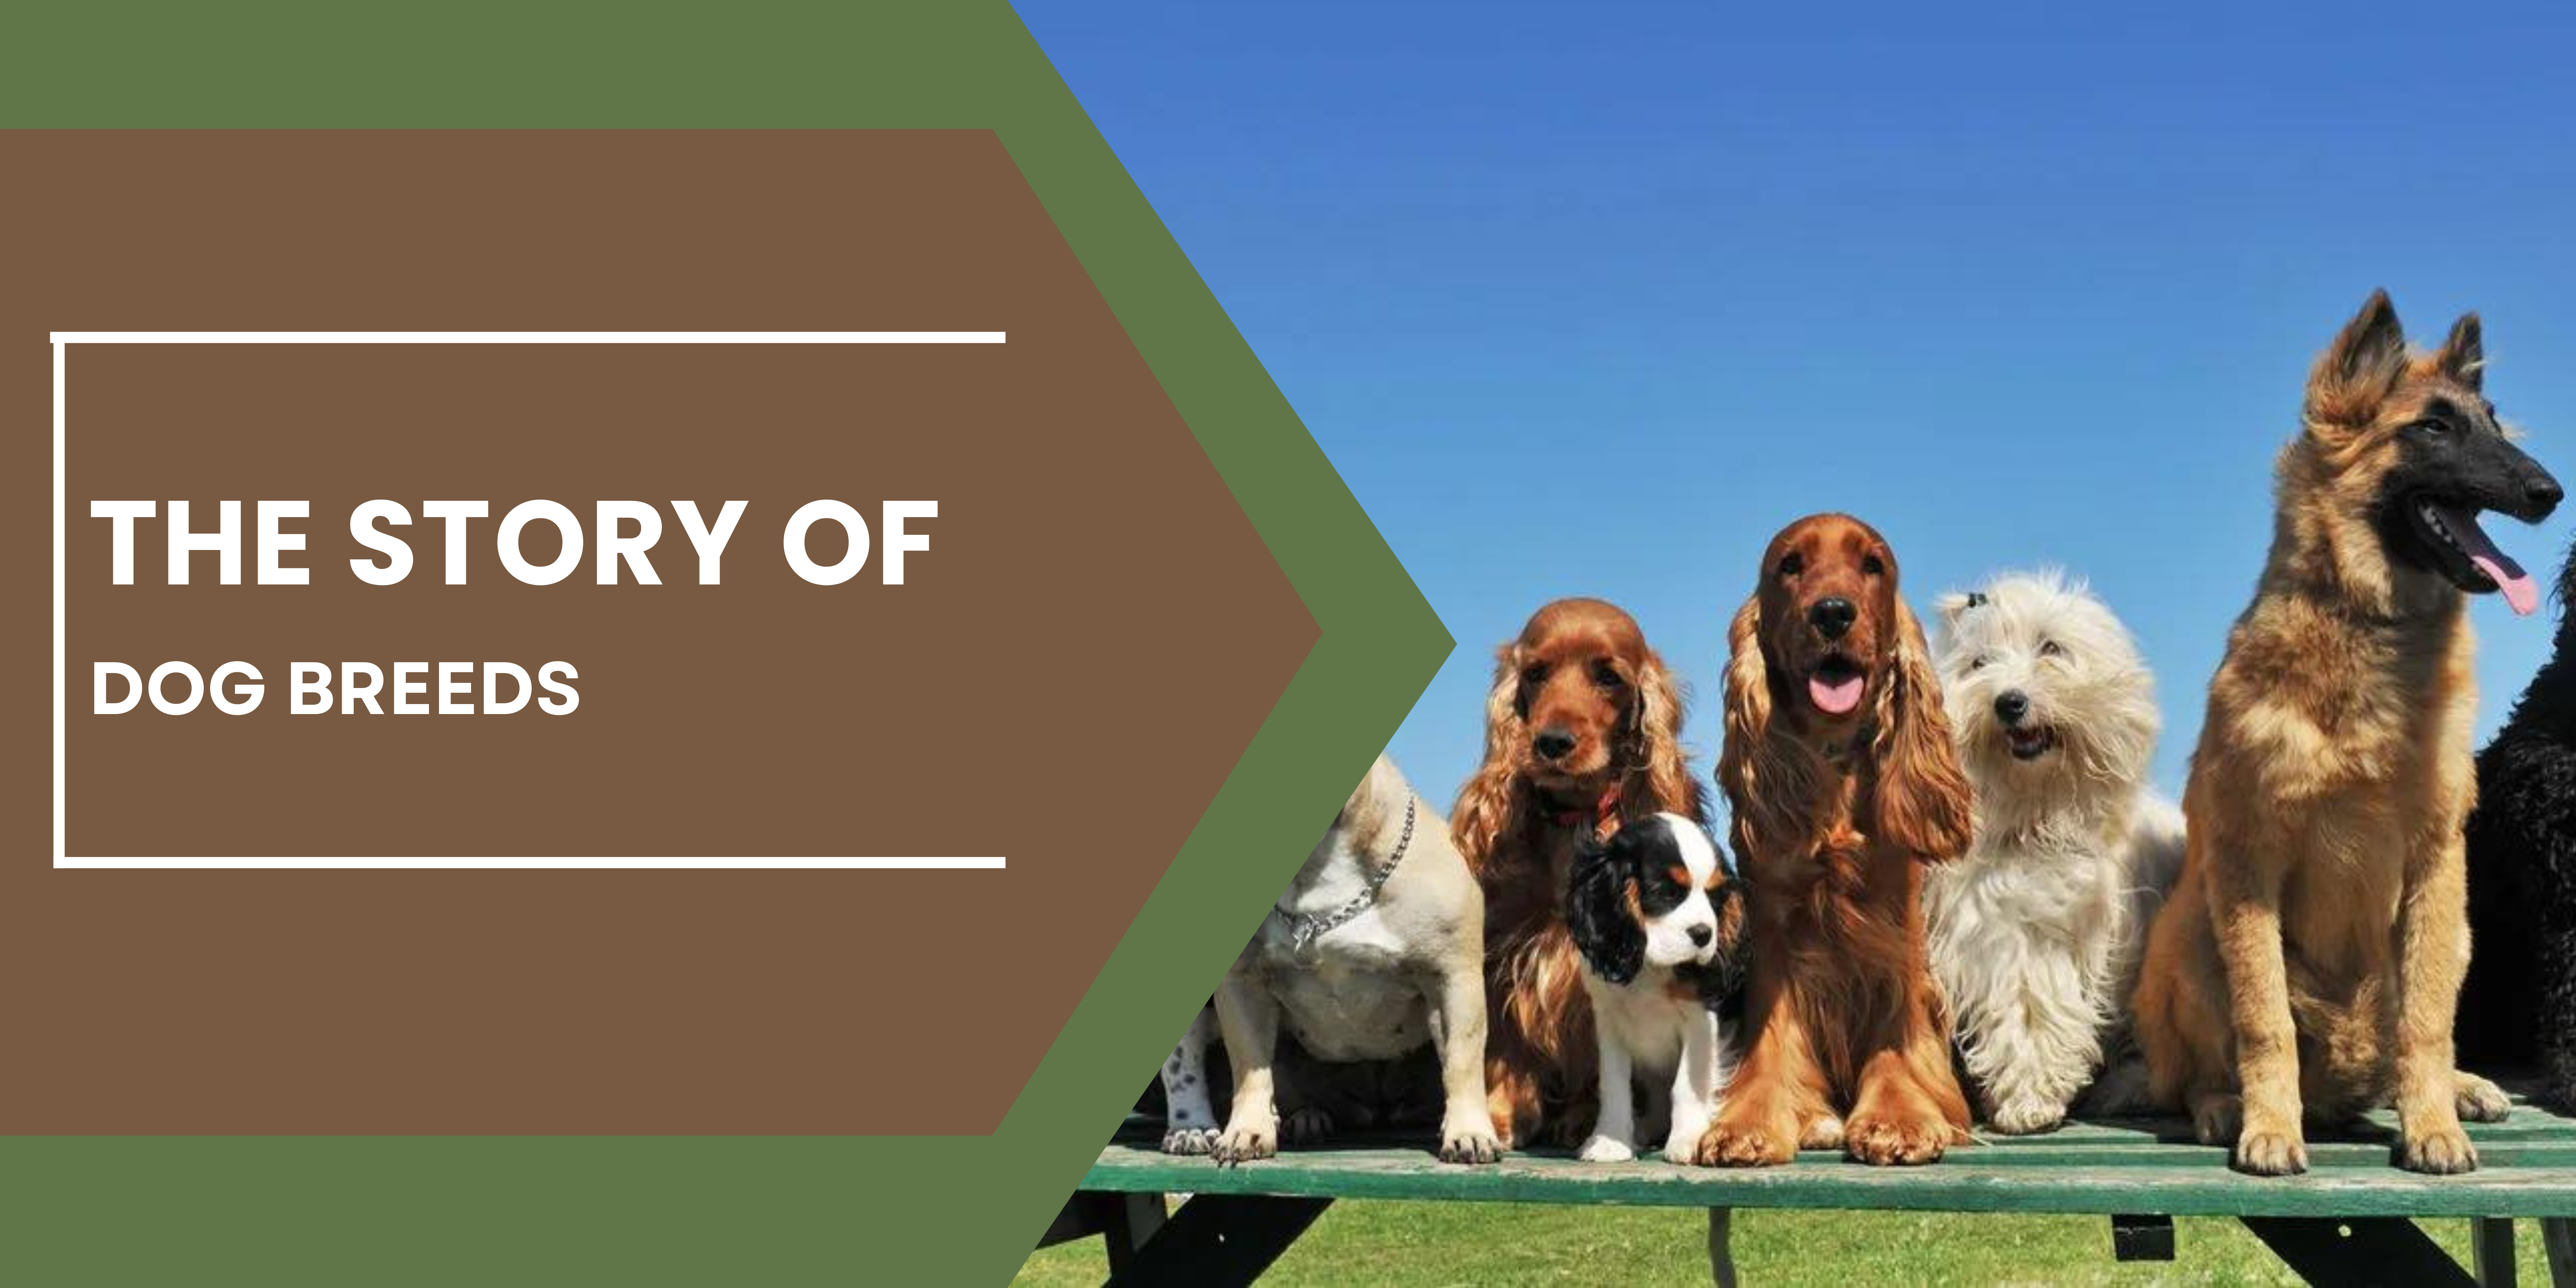 The Story of Dog Breeds